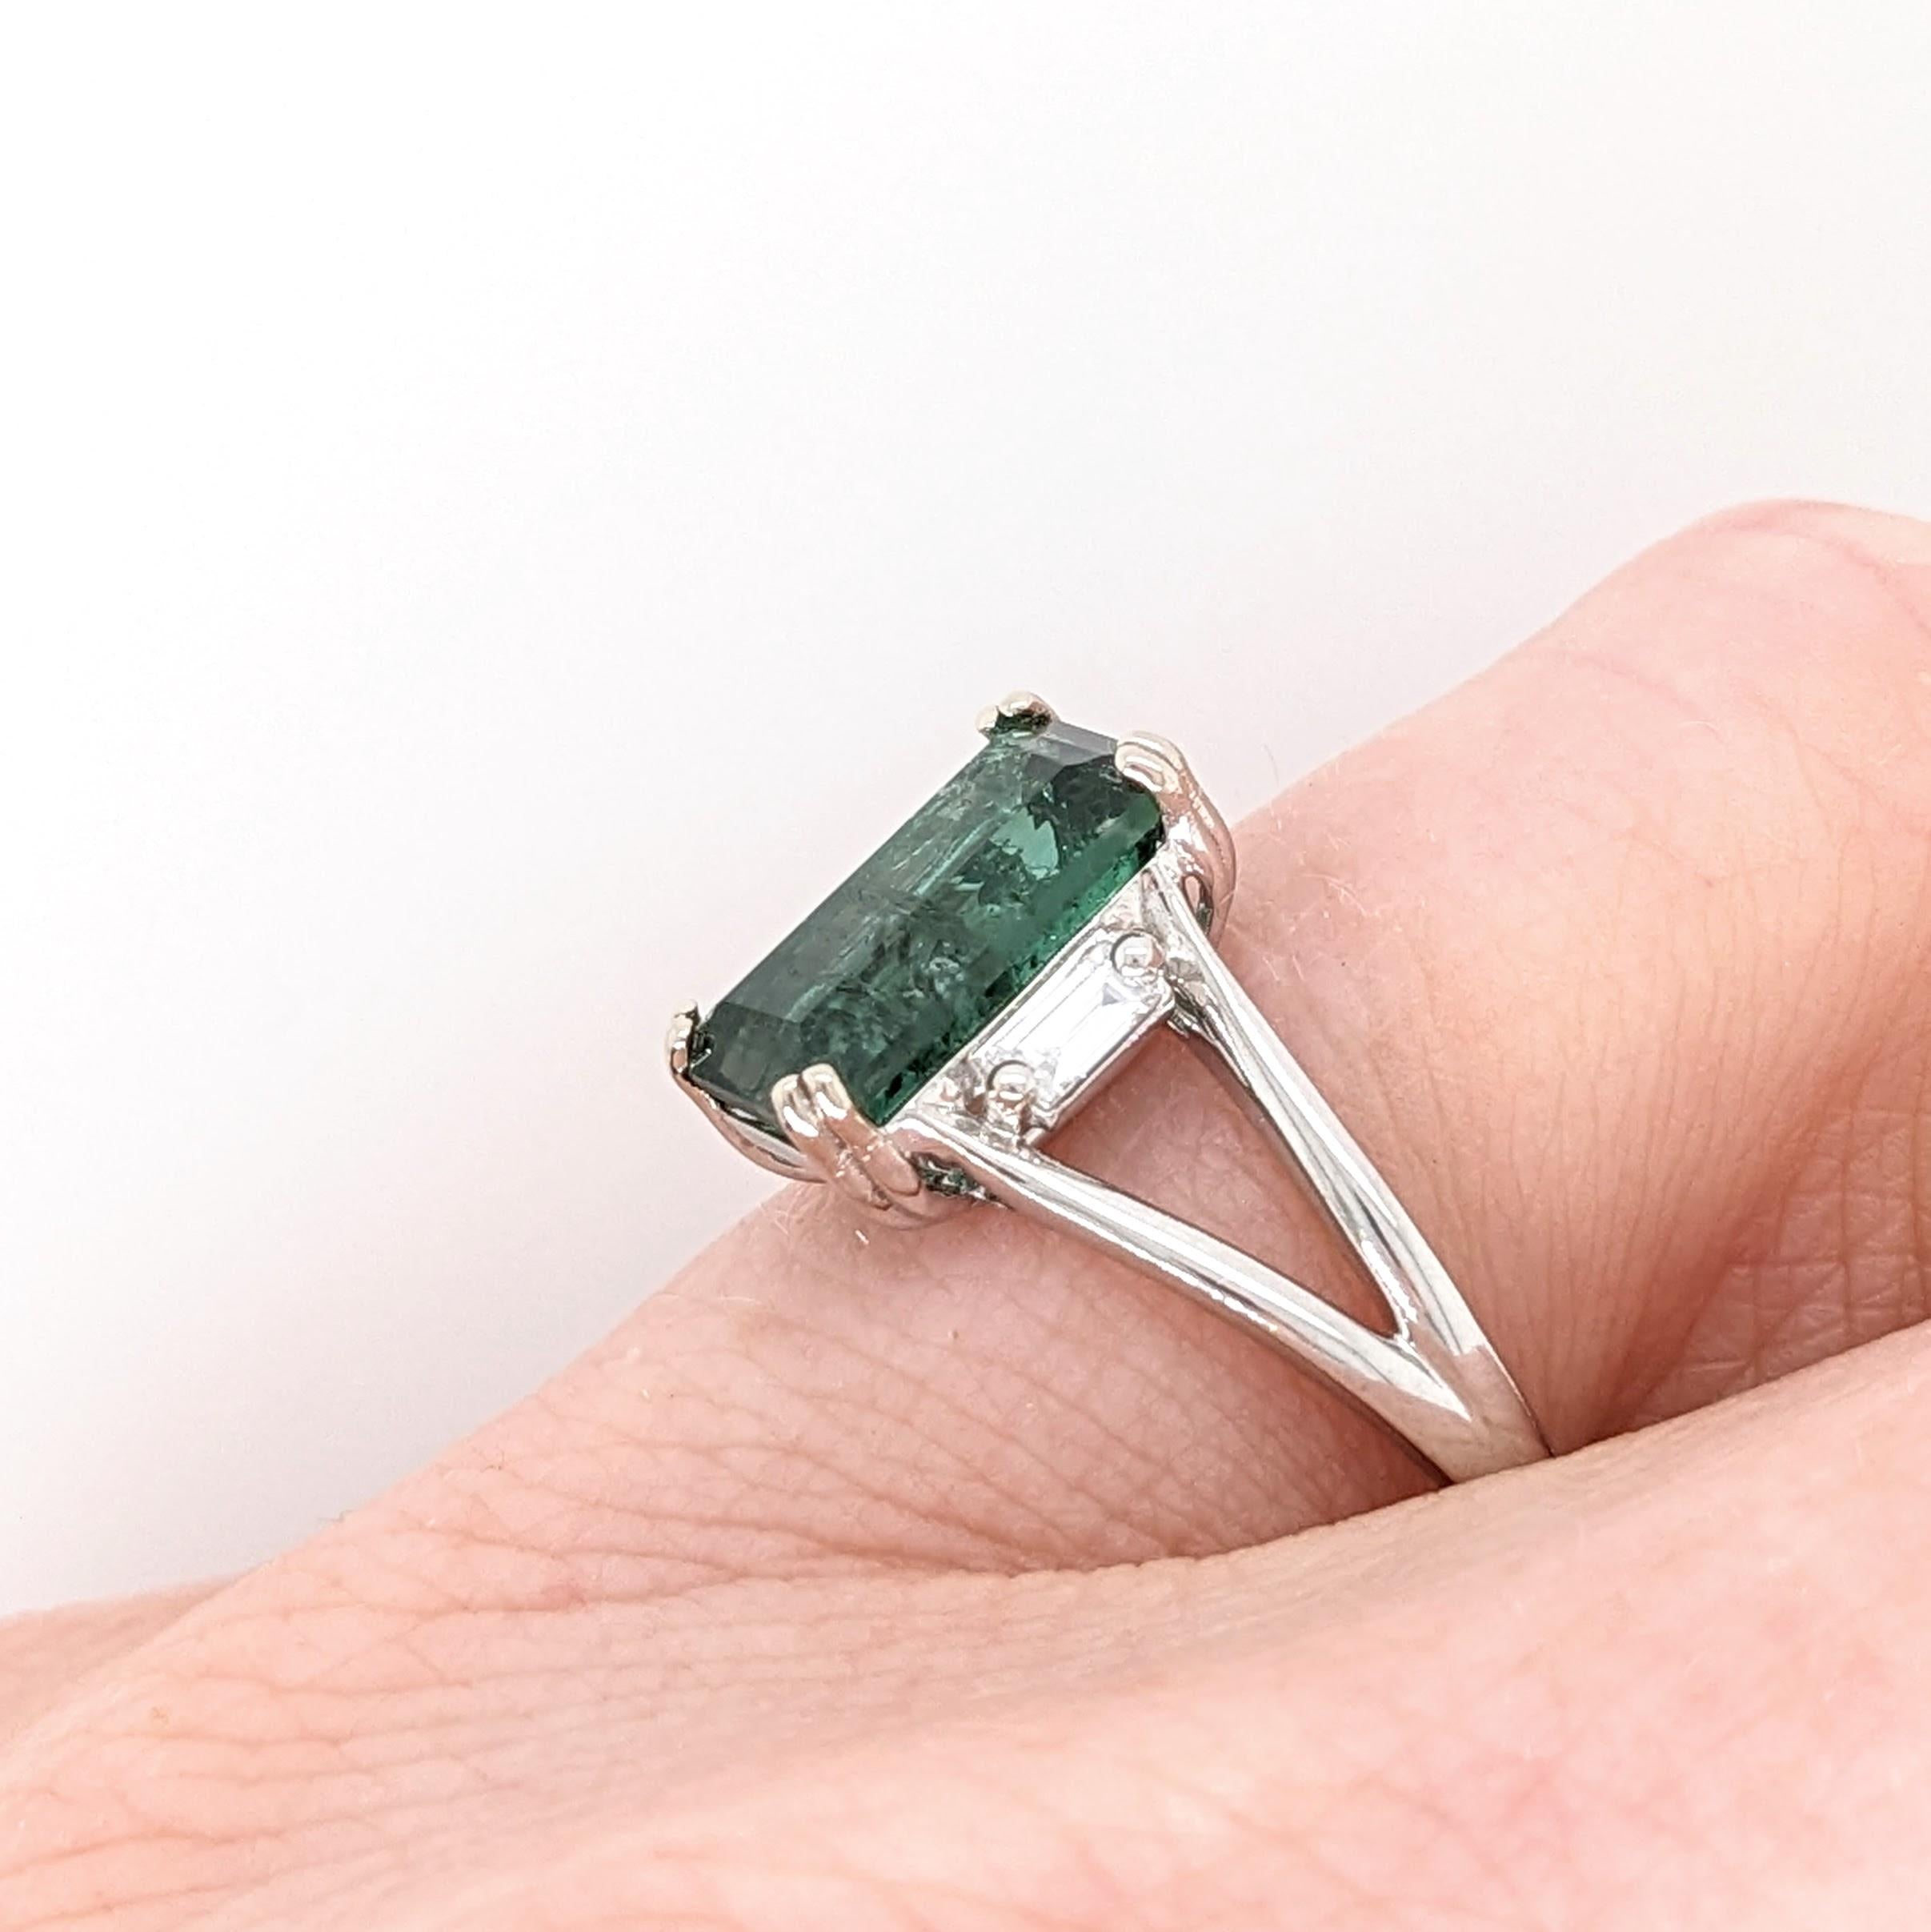 2.57ct Tourmaline w Diamond Accents in 14K Solid White Gold Emerald Cut 10x6mm For Sale 3